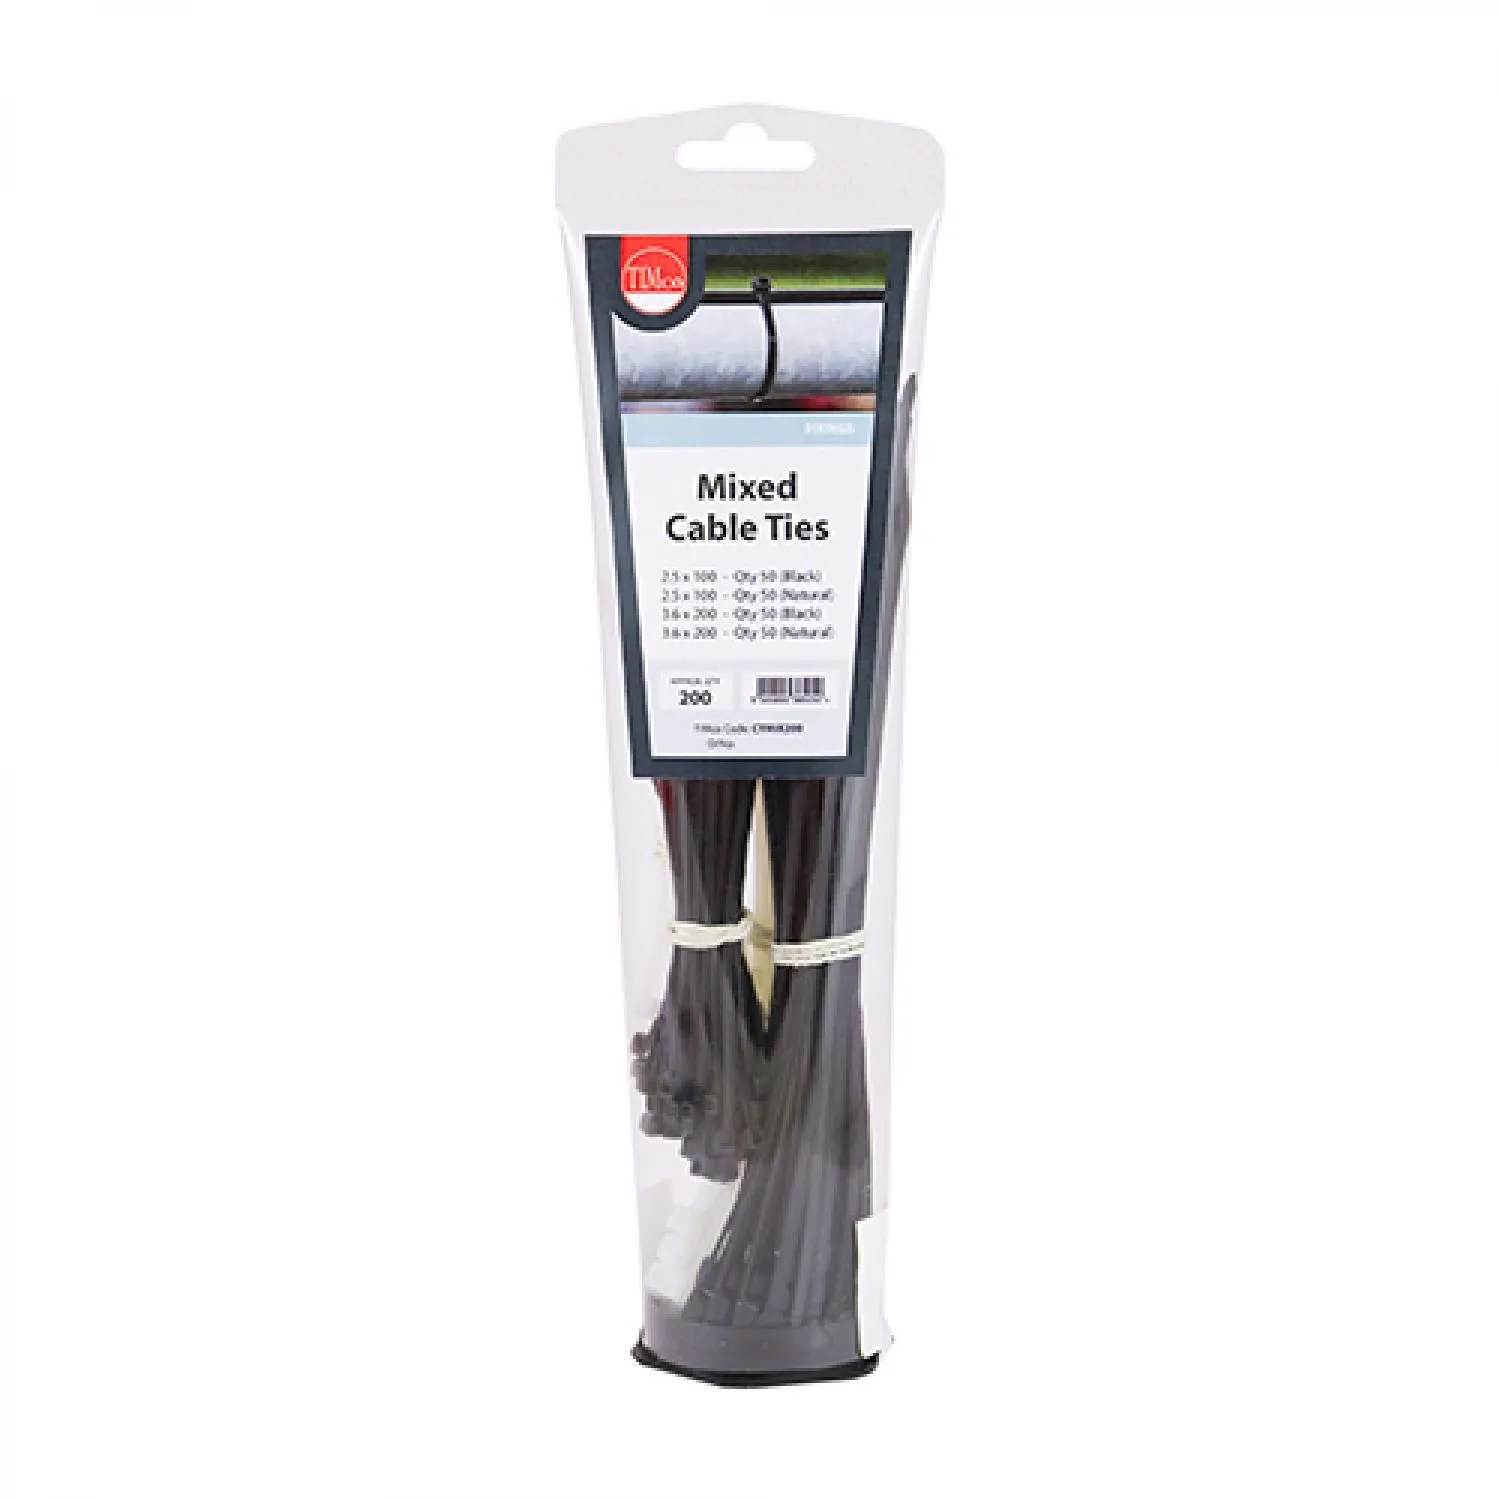 TIMco Mixed Cable Ties 2.5 x 100 & 3.6 x 200mm (Pack of 200) Natural/Black